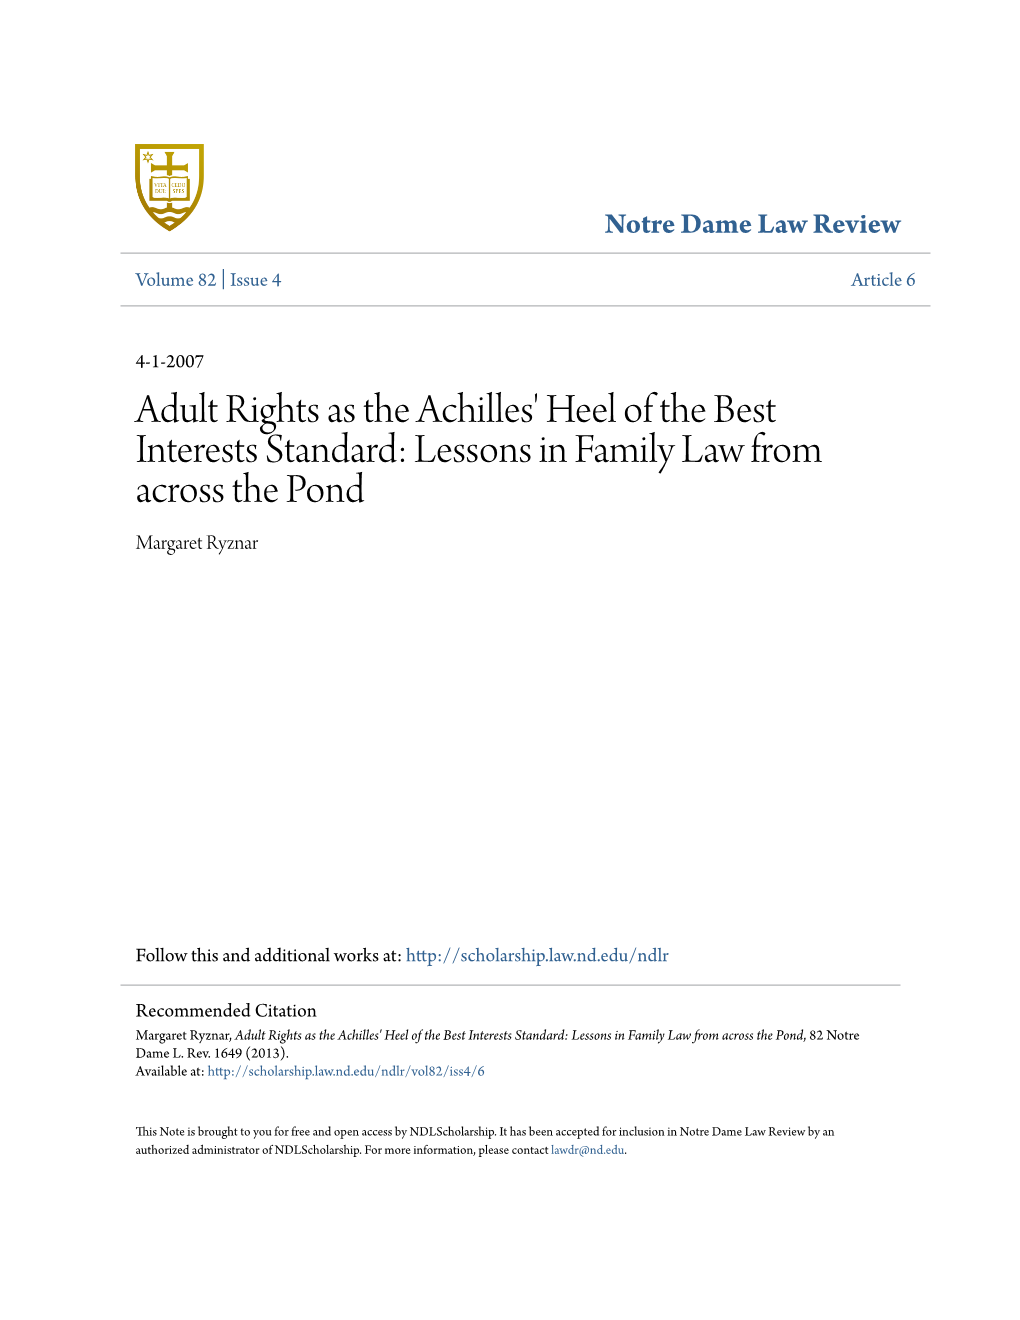 Adult Rights As the Achilles' Heel of the Best Interests Standard: Lessons in Family Law from Across the Pond Margaret Ryznar